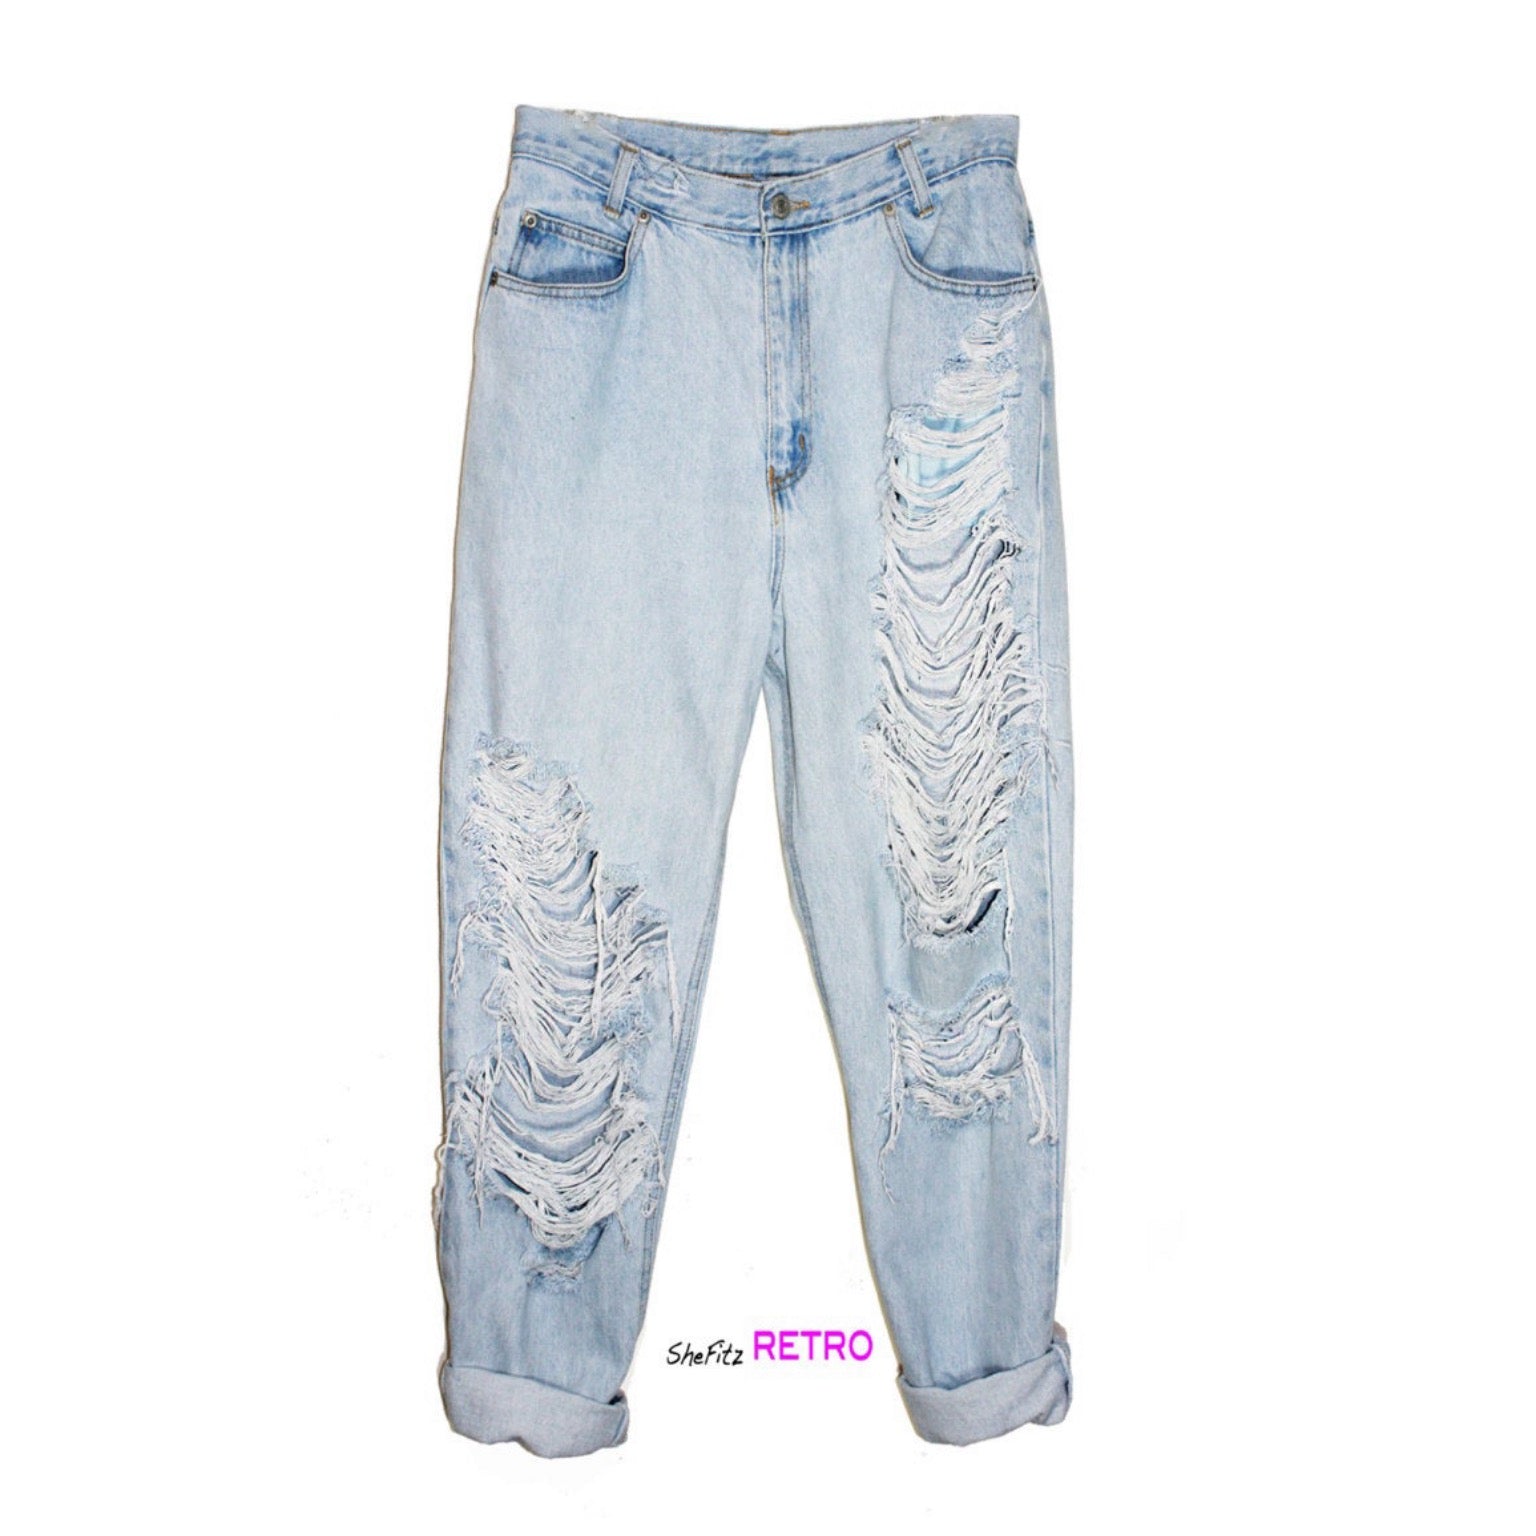 Made To Order Vintage Distressed High Waisted Mom Jeans